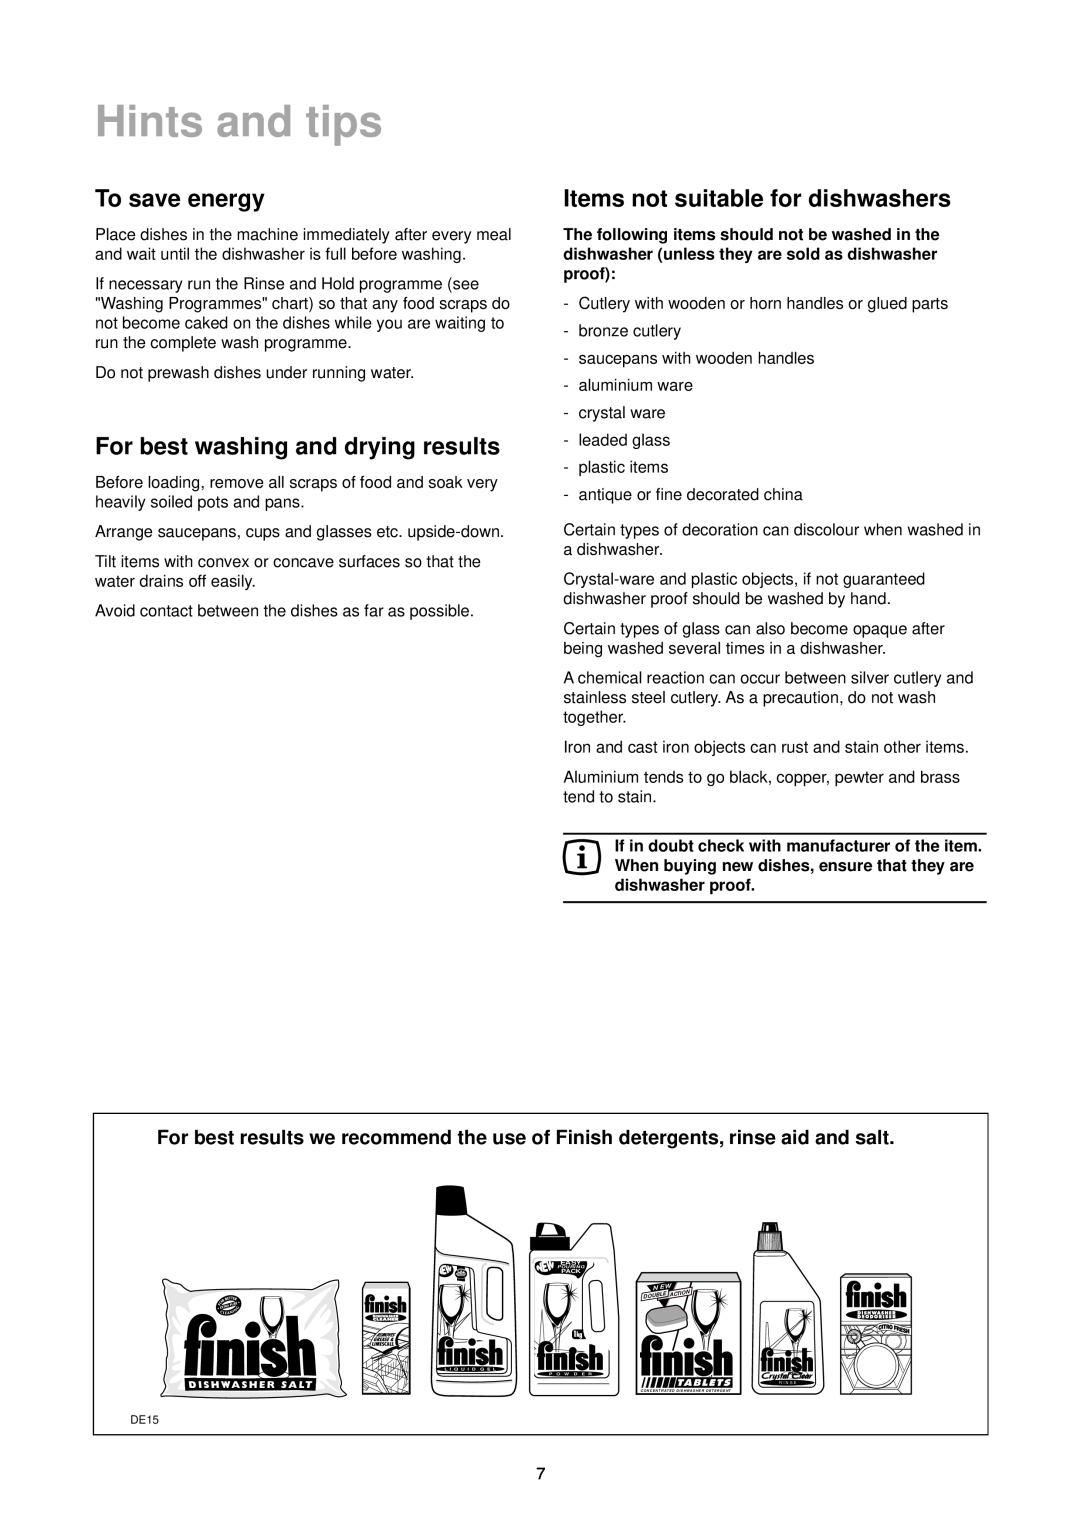 Zanussi DA 6152 Hints and tips, To save energy, For best washing and drying results, Items not suitable for dishwashers 